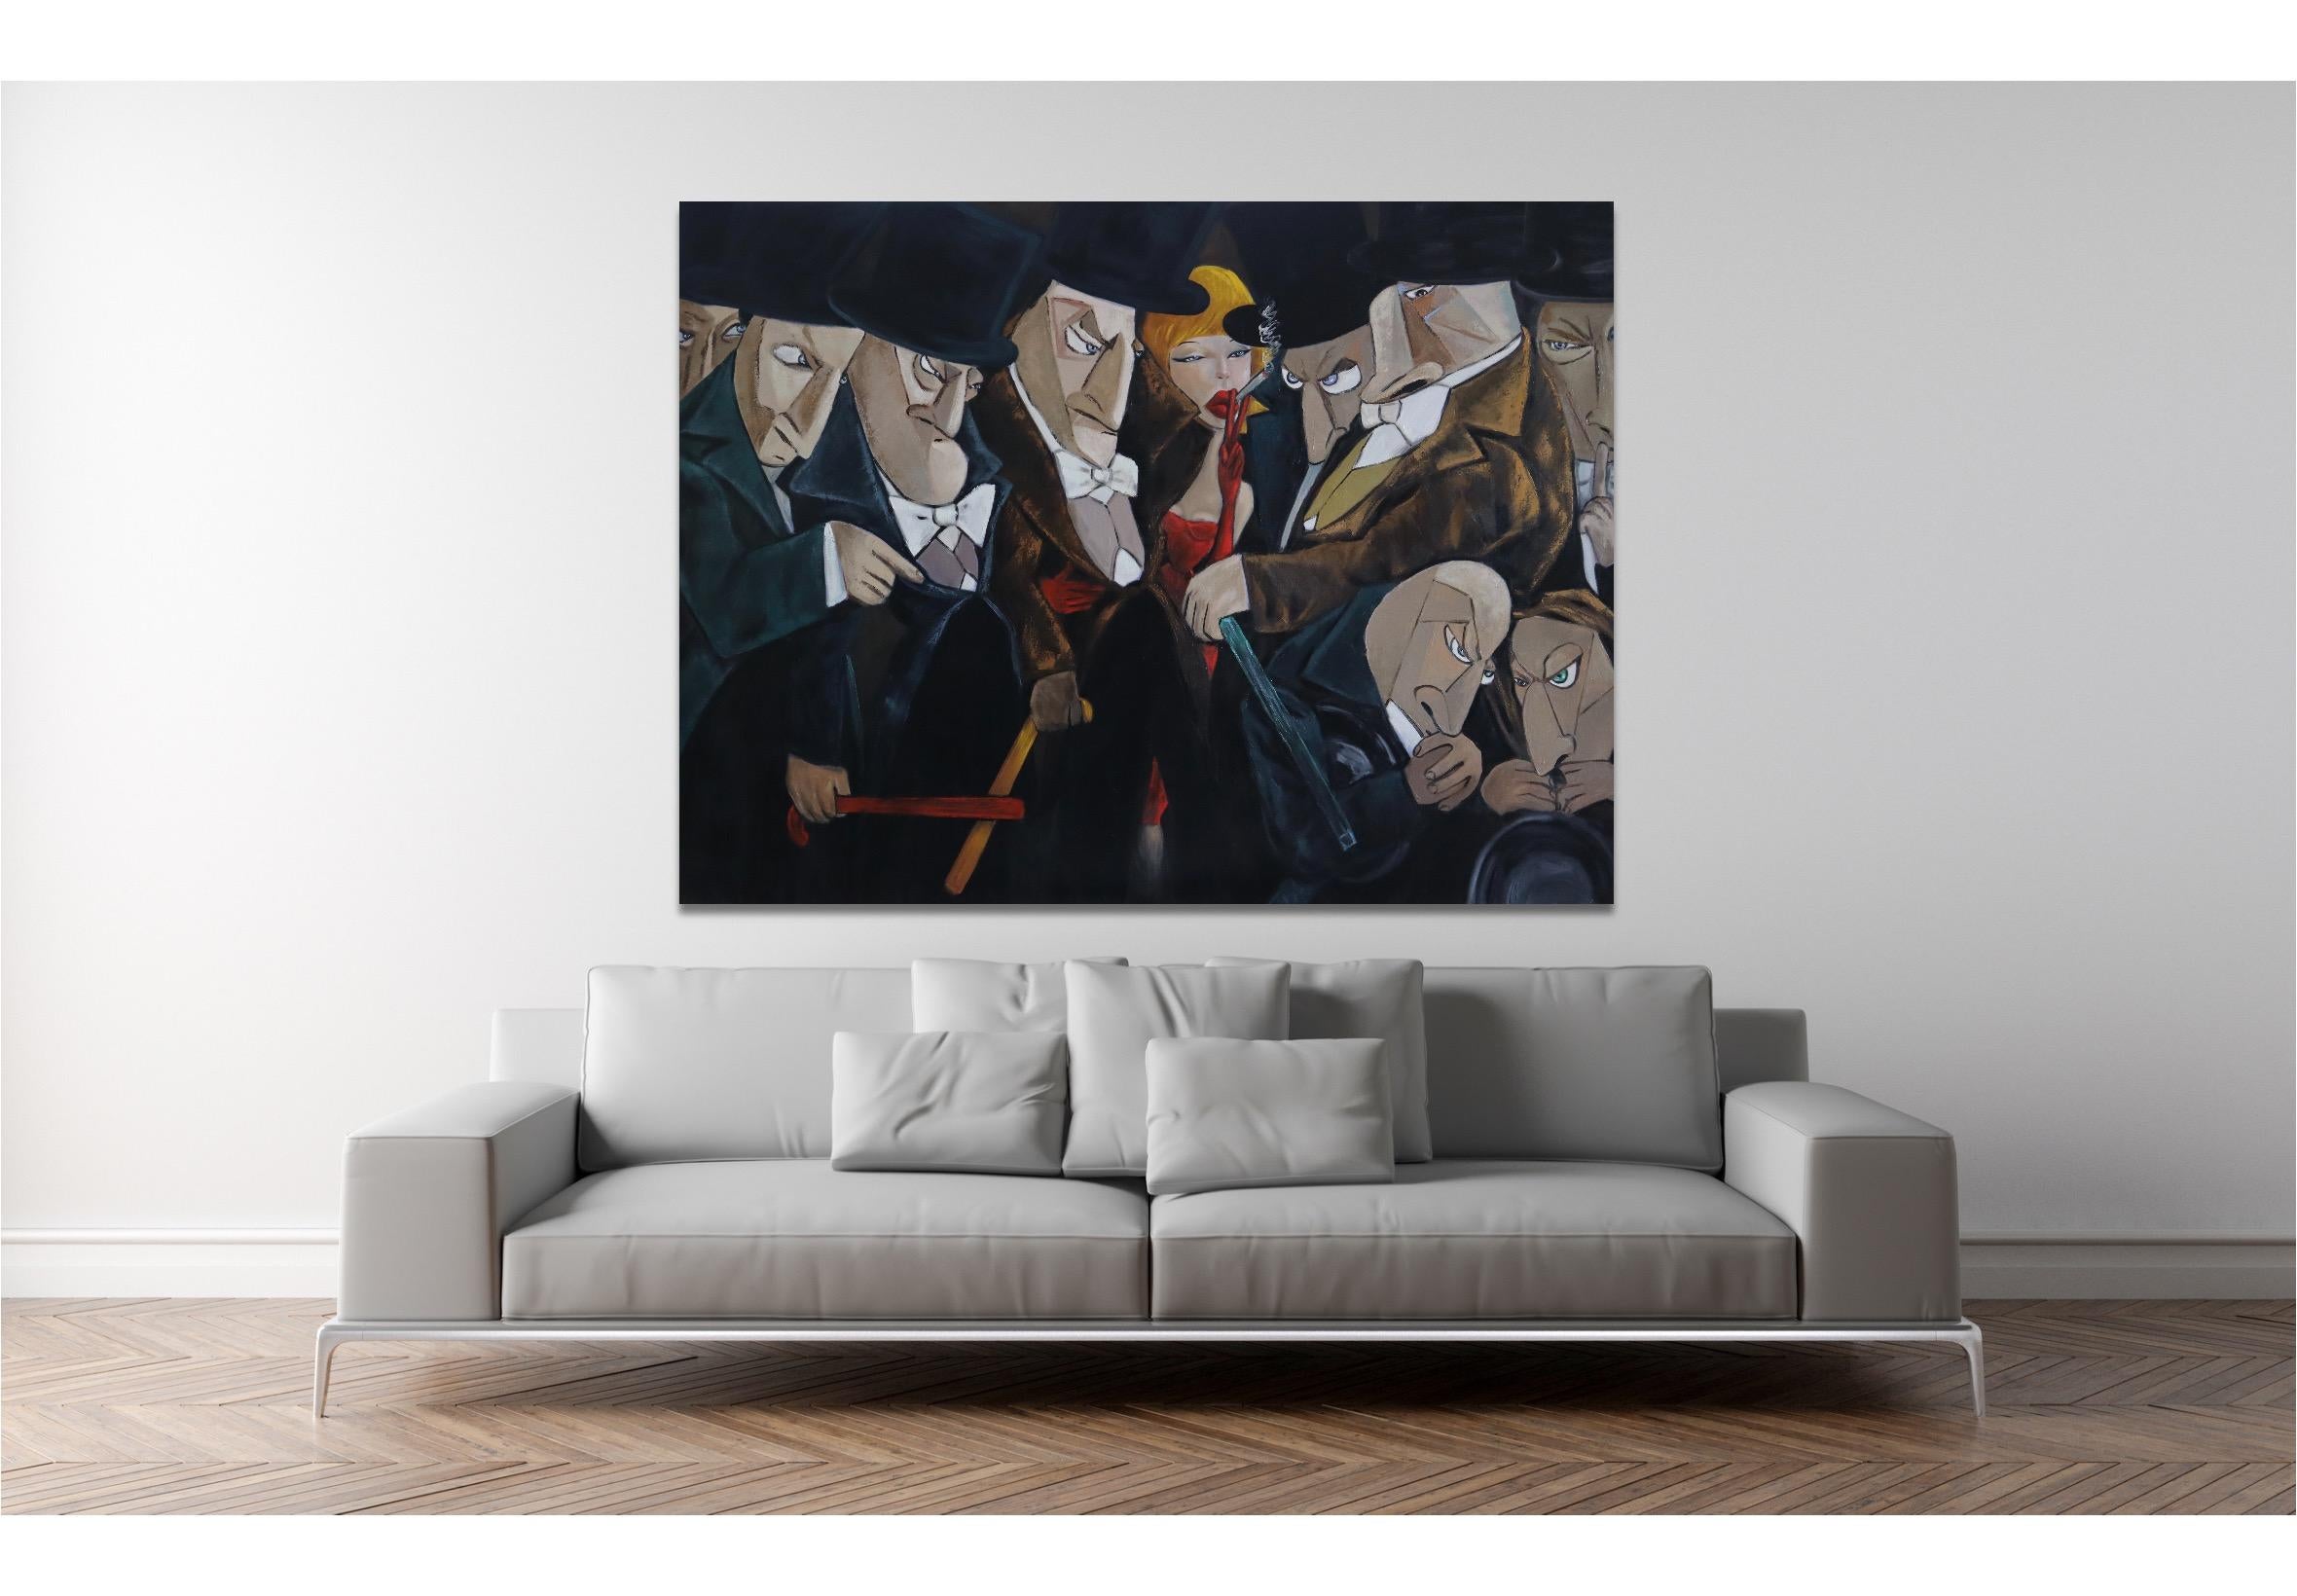 Top Hat and Tails, Original Figurative Oil Painting 150x200 cm by Ta Byrne For Sale 4